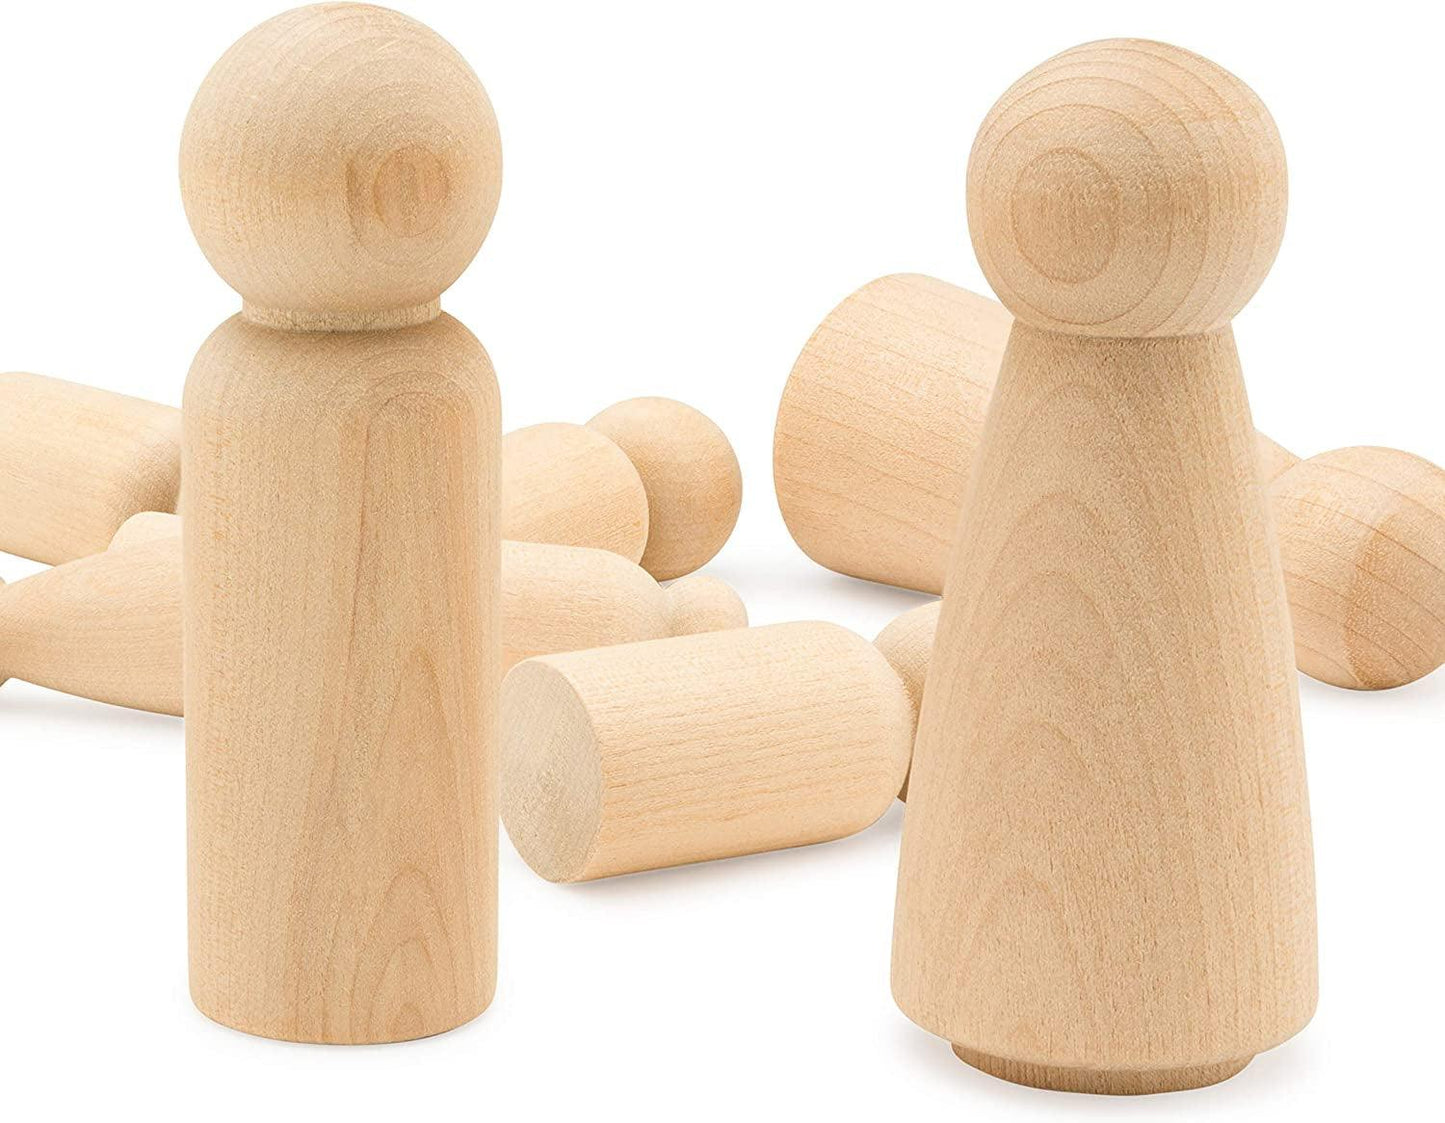 Wooden Peg Dolls 3-½”, 5 Mom & 5 Dad Set, Unfinished Birch Wooden Figures for People Crafts & Wedding Cake Toppers - WoodArtSupply